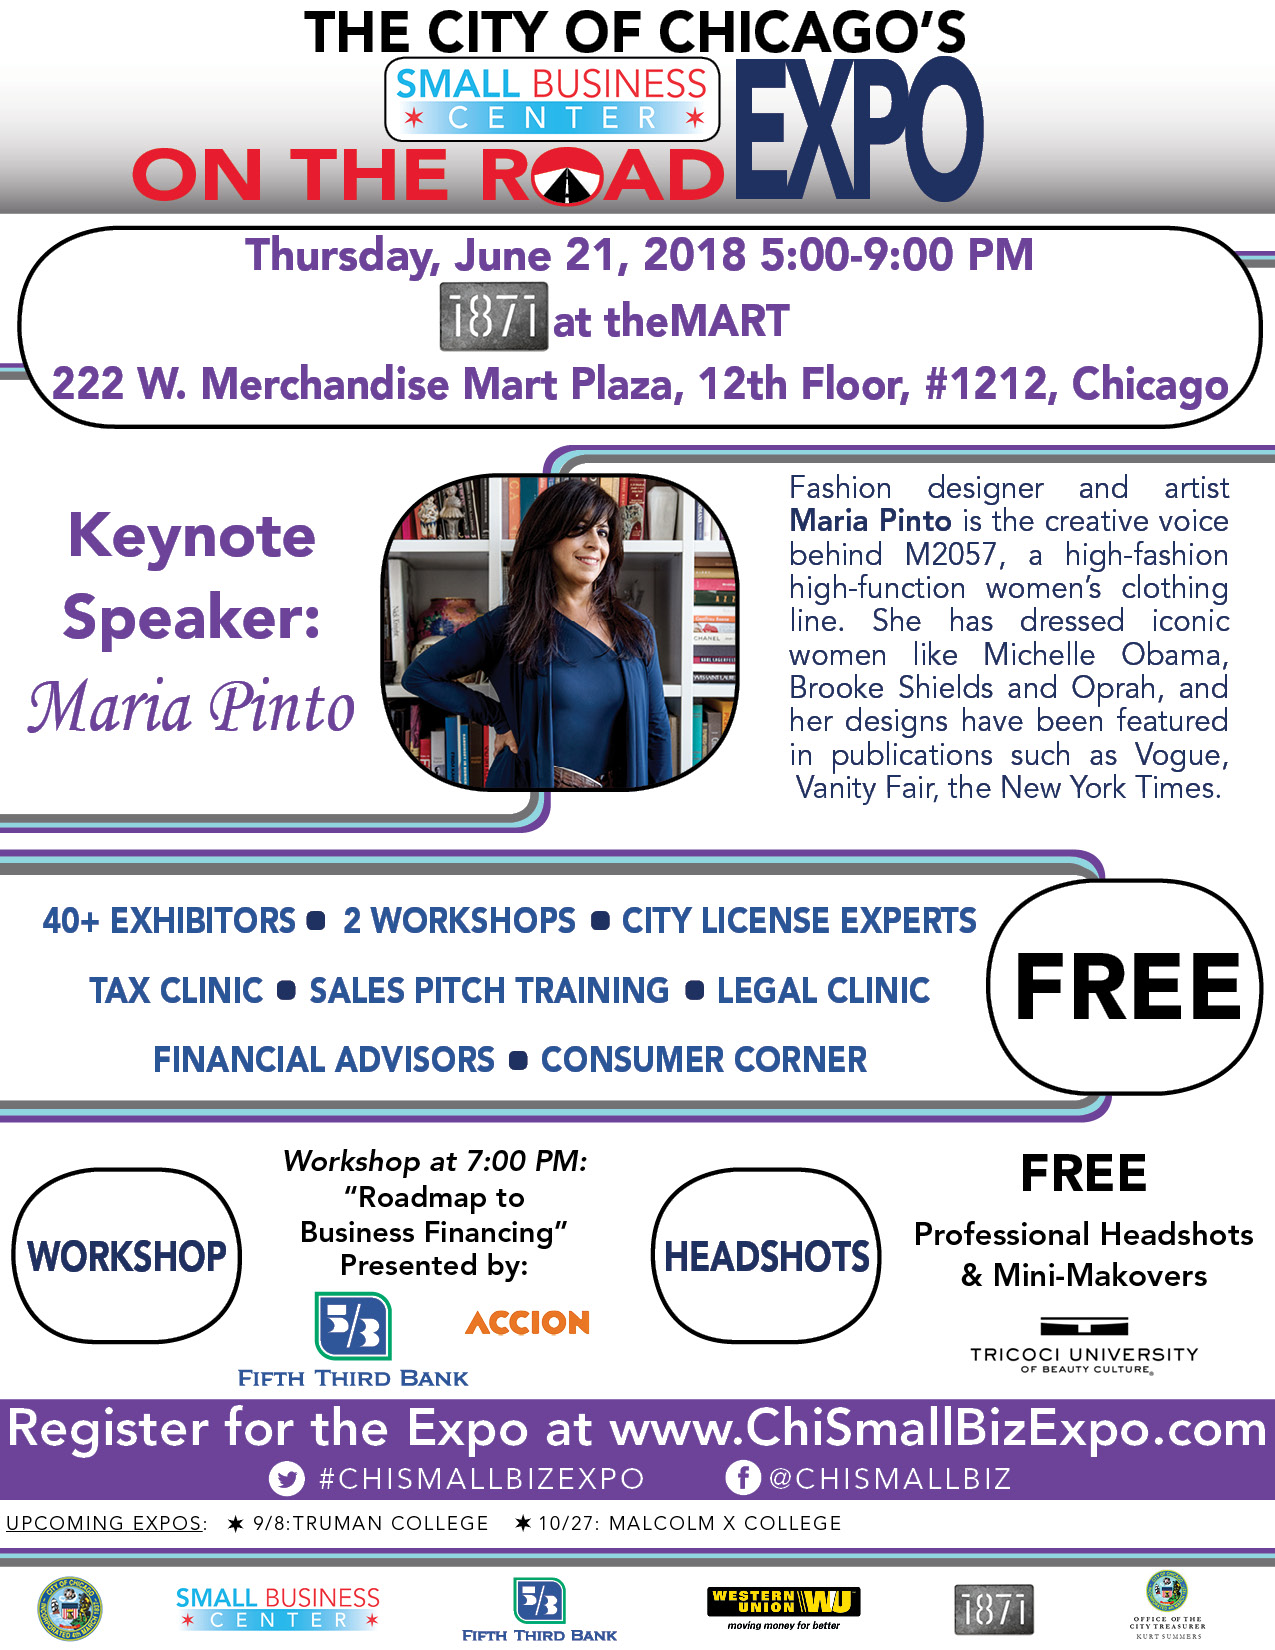 City of Chicago Small Business Center On the Road Expo